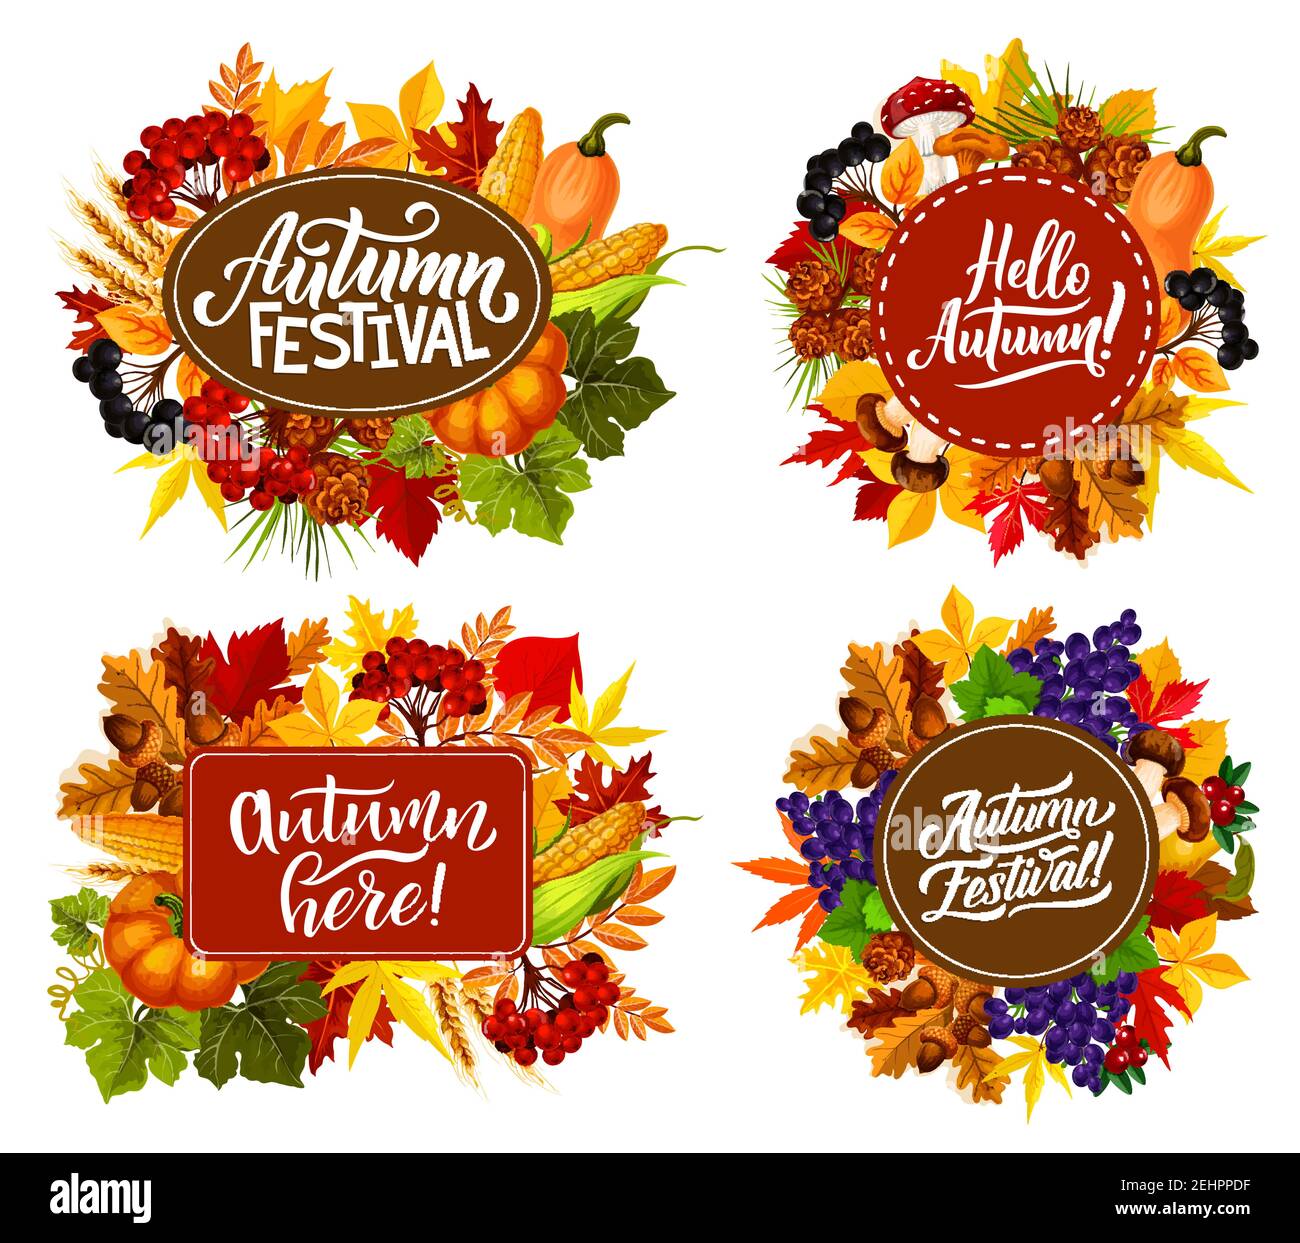 Fall fest or autumn festival posters with seasonal holiday quotes. Vector pumpkin and corn harvest with mushrooms and berries in autumn maple leaf fol Stock Vector